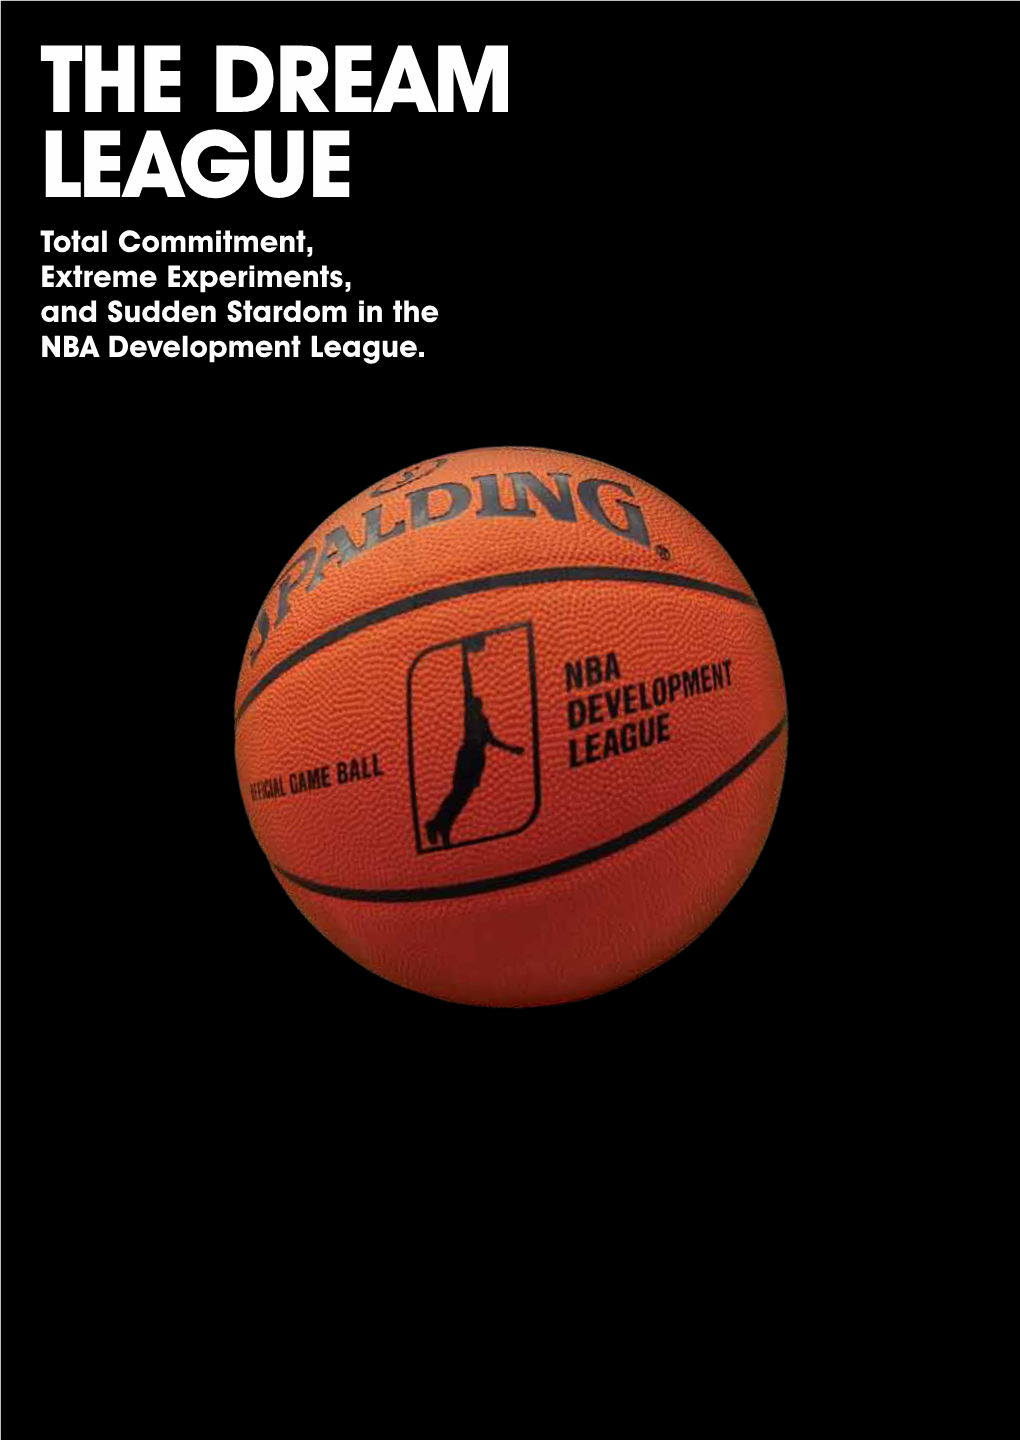 The Dream League Total Commitment, Extreme Experiments, and Sudden Stardom in the NBA Development League